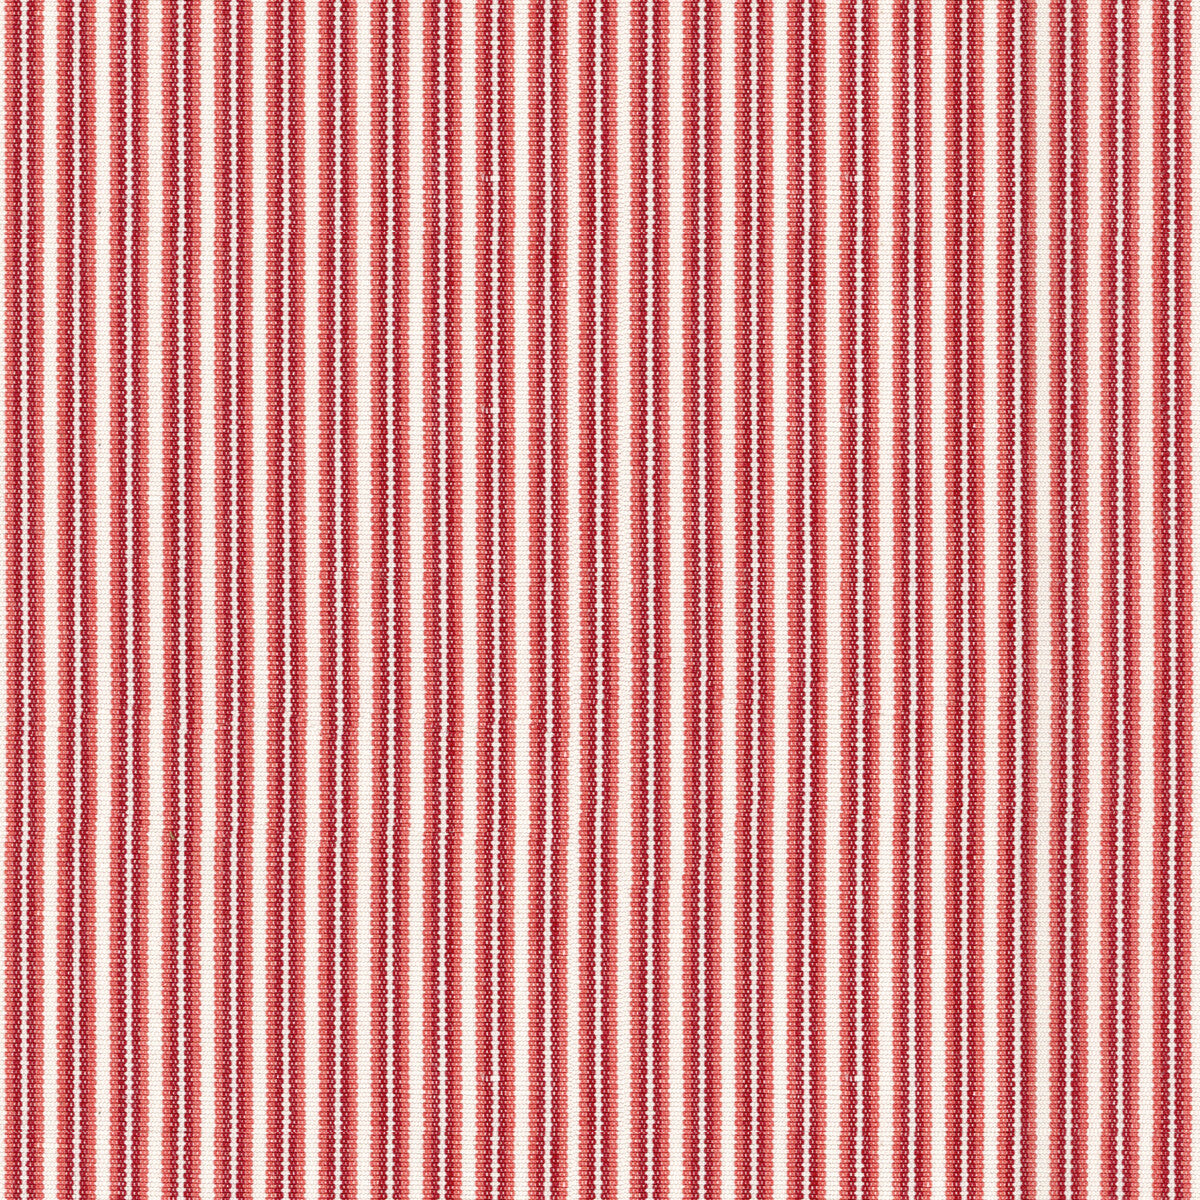 Chamas Stripe fabric in tomato color - pattern 8017103.19.0 - by Brunschwig &amp; Fils in the Durance collection